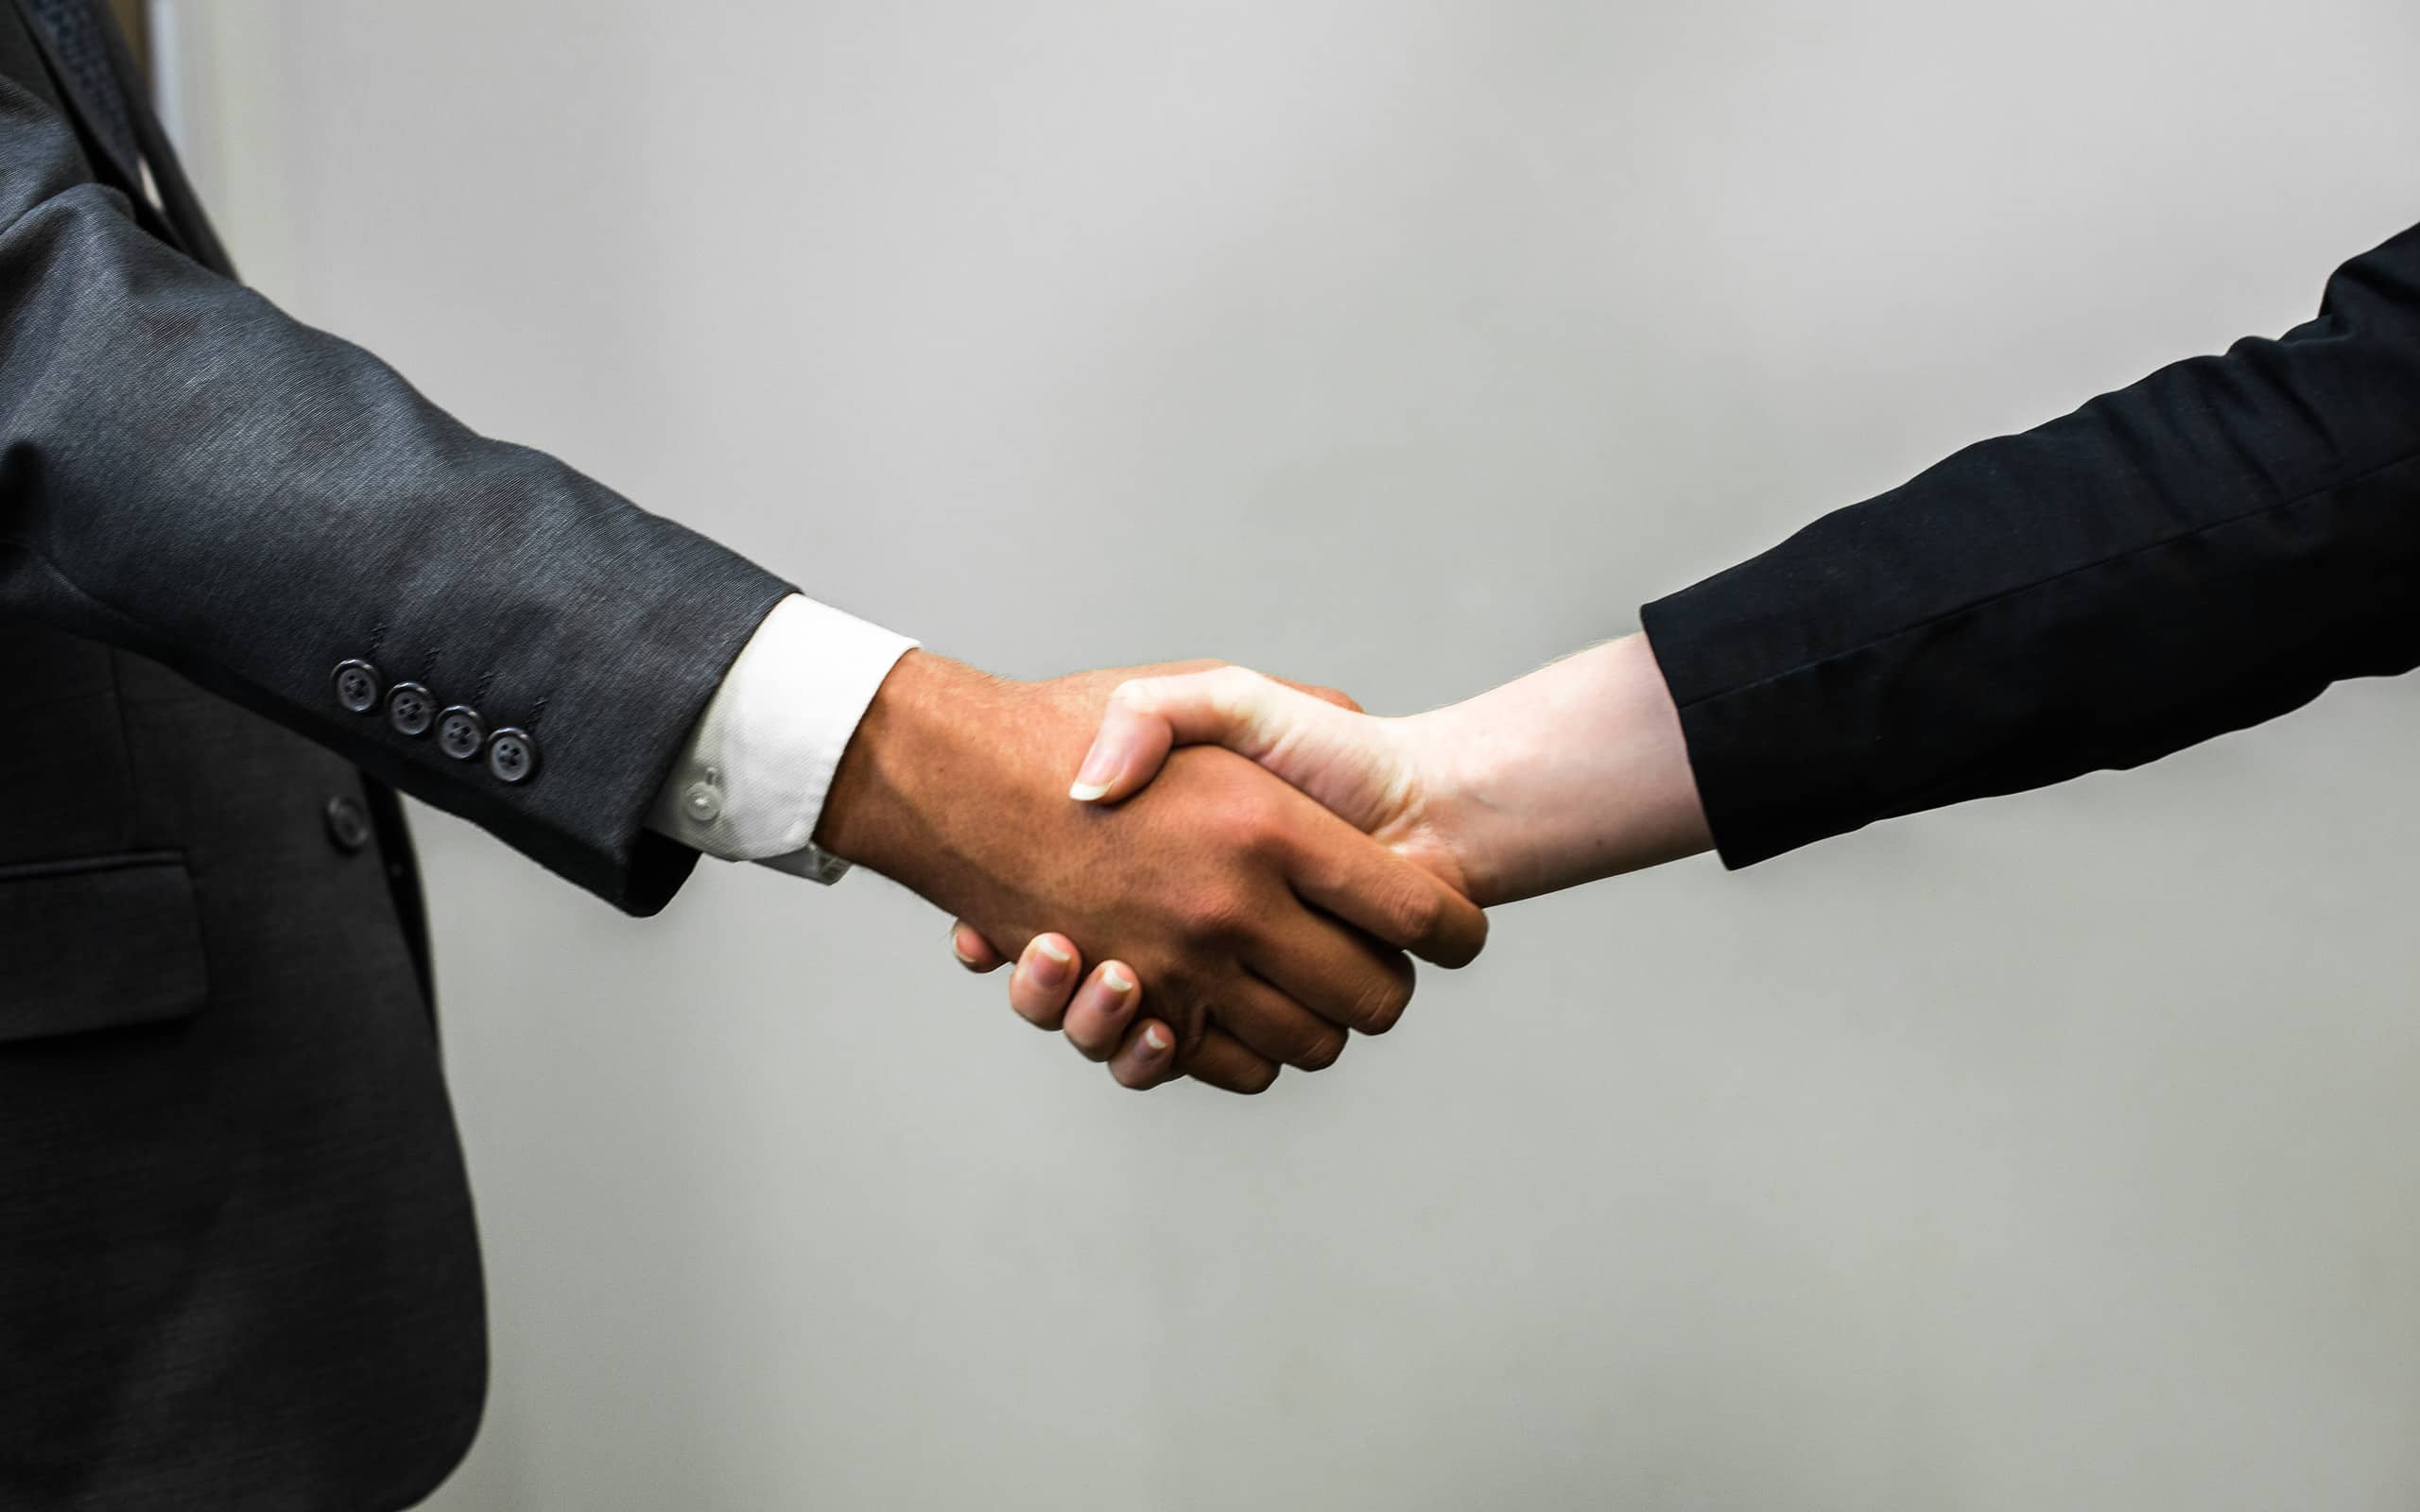 When two people come to an agreement over a specific topic, they shake hands on it. In regard to the topic of recruitment, when one has decided who they want to recruit, they may shake hands on it.